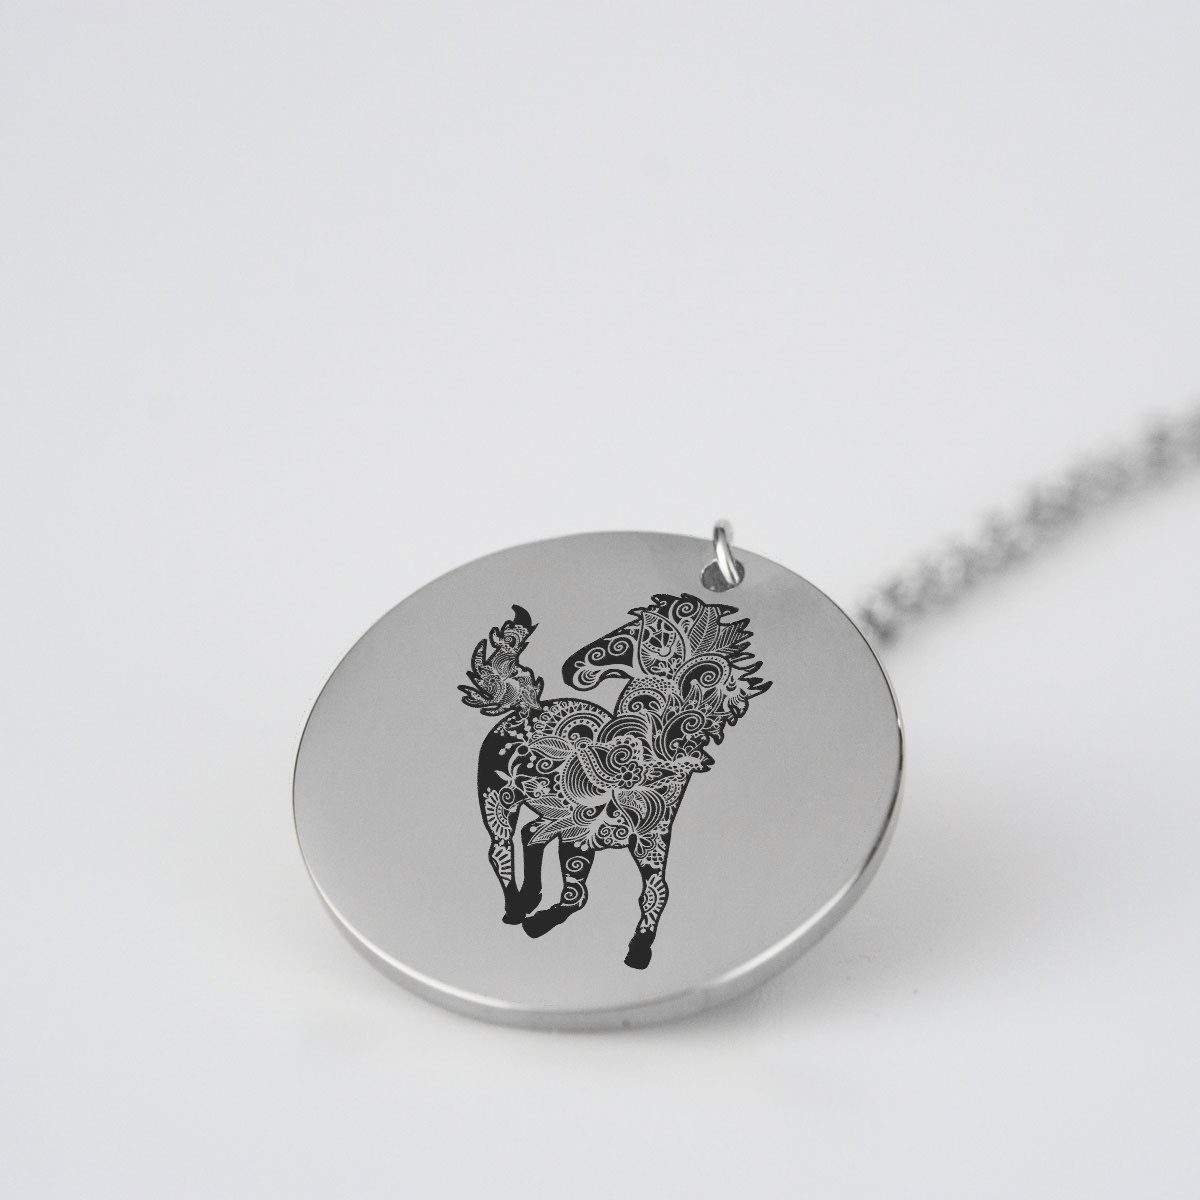 Wild Horse Silhouette Charm Necklace